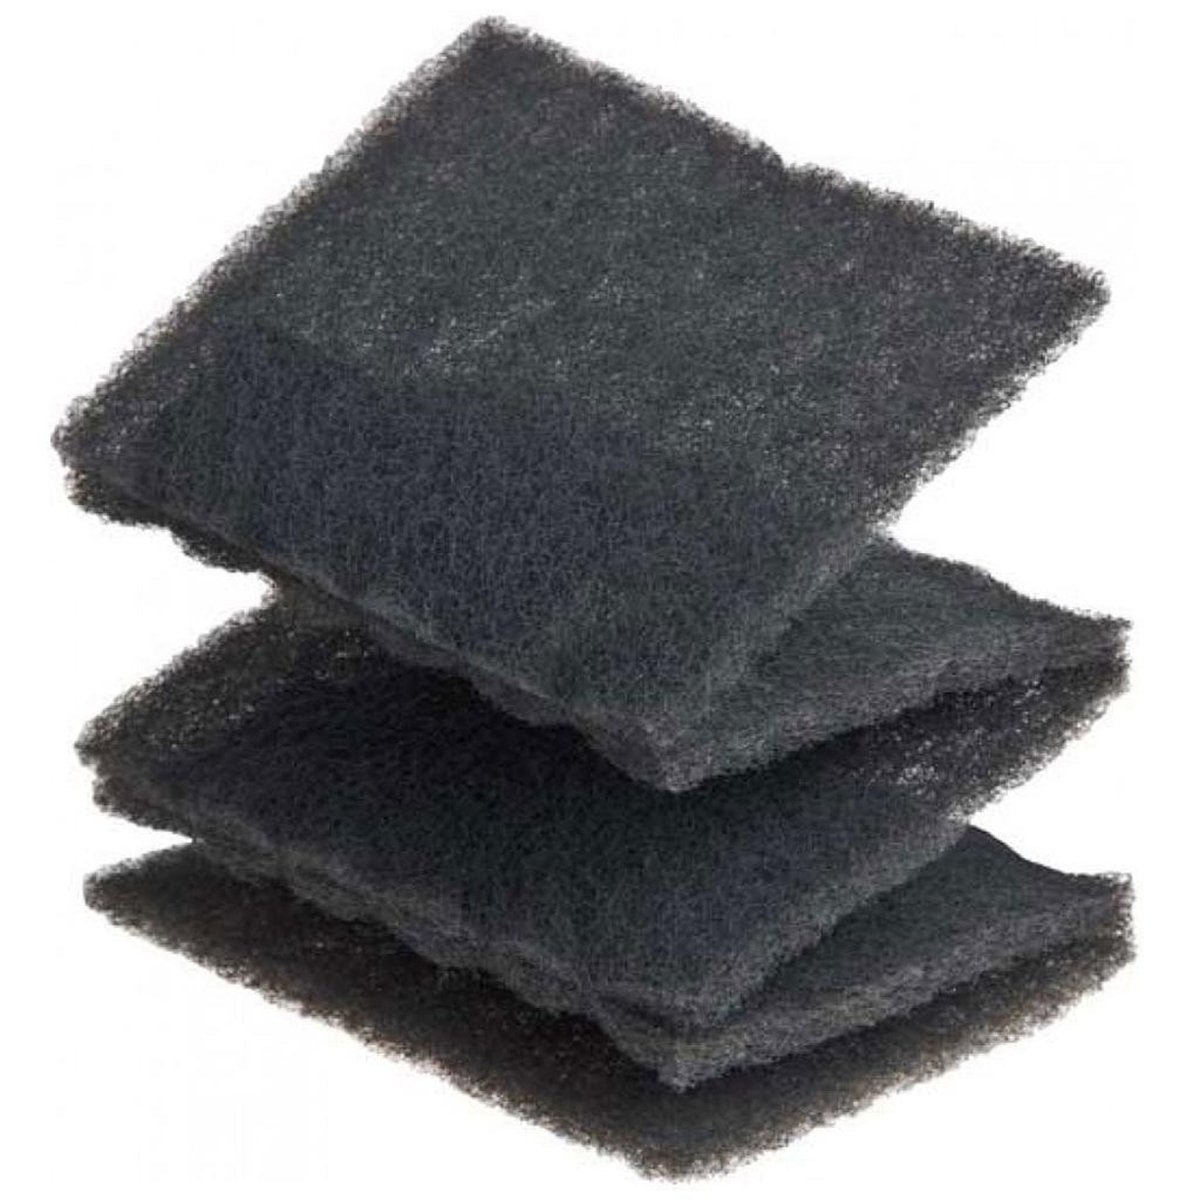 Green-coloured Vlies is a super-fine synthetic woven abrasive. It comes in 115x152mm pads that can be torn off.